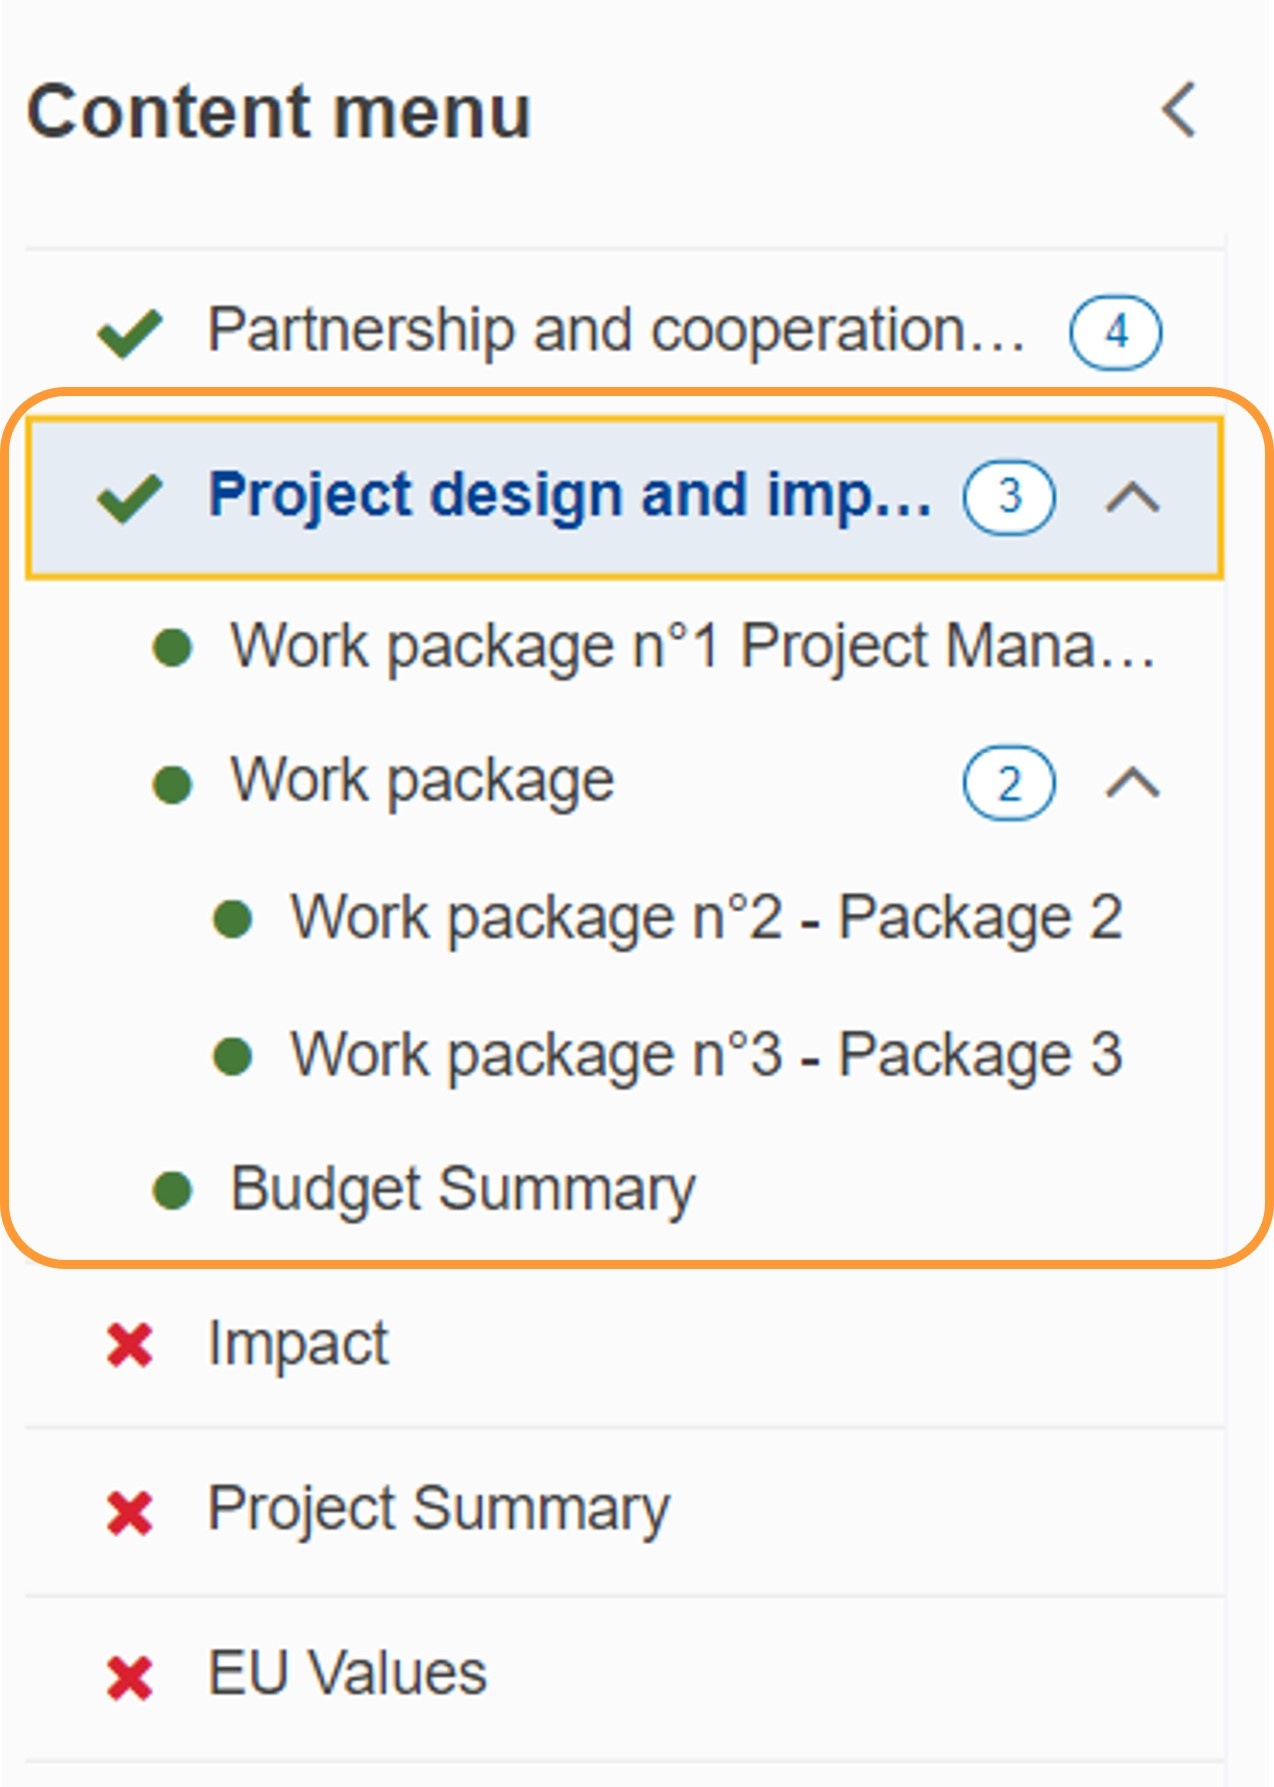 Project design and implementation section marked complete